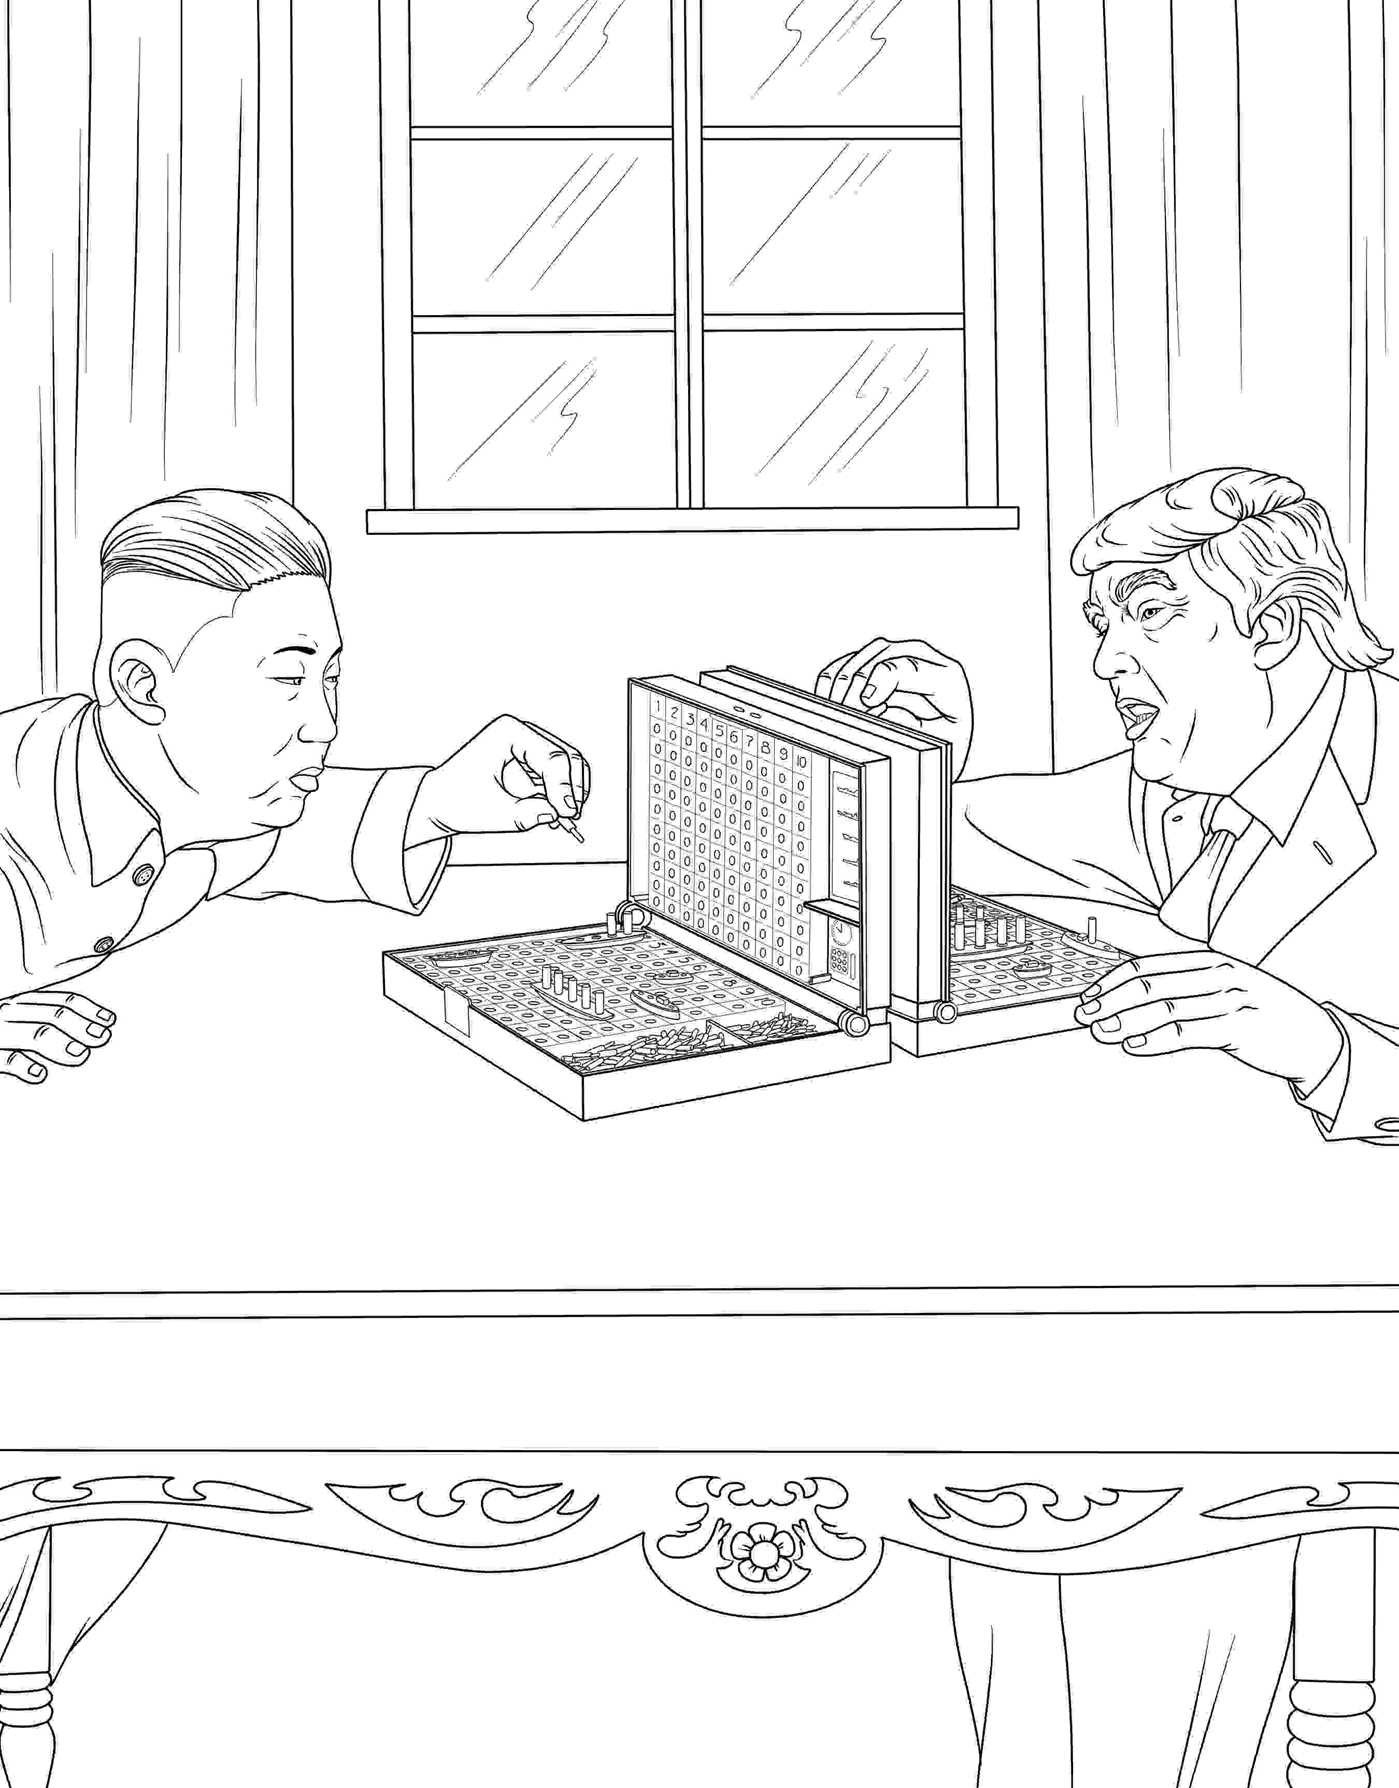 Trump Coloring Pages
 The Trump Coloring Book Book by M G Anthony